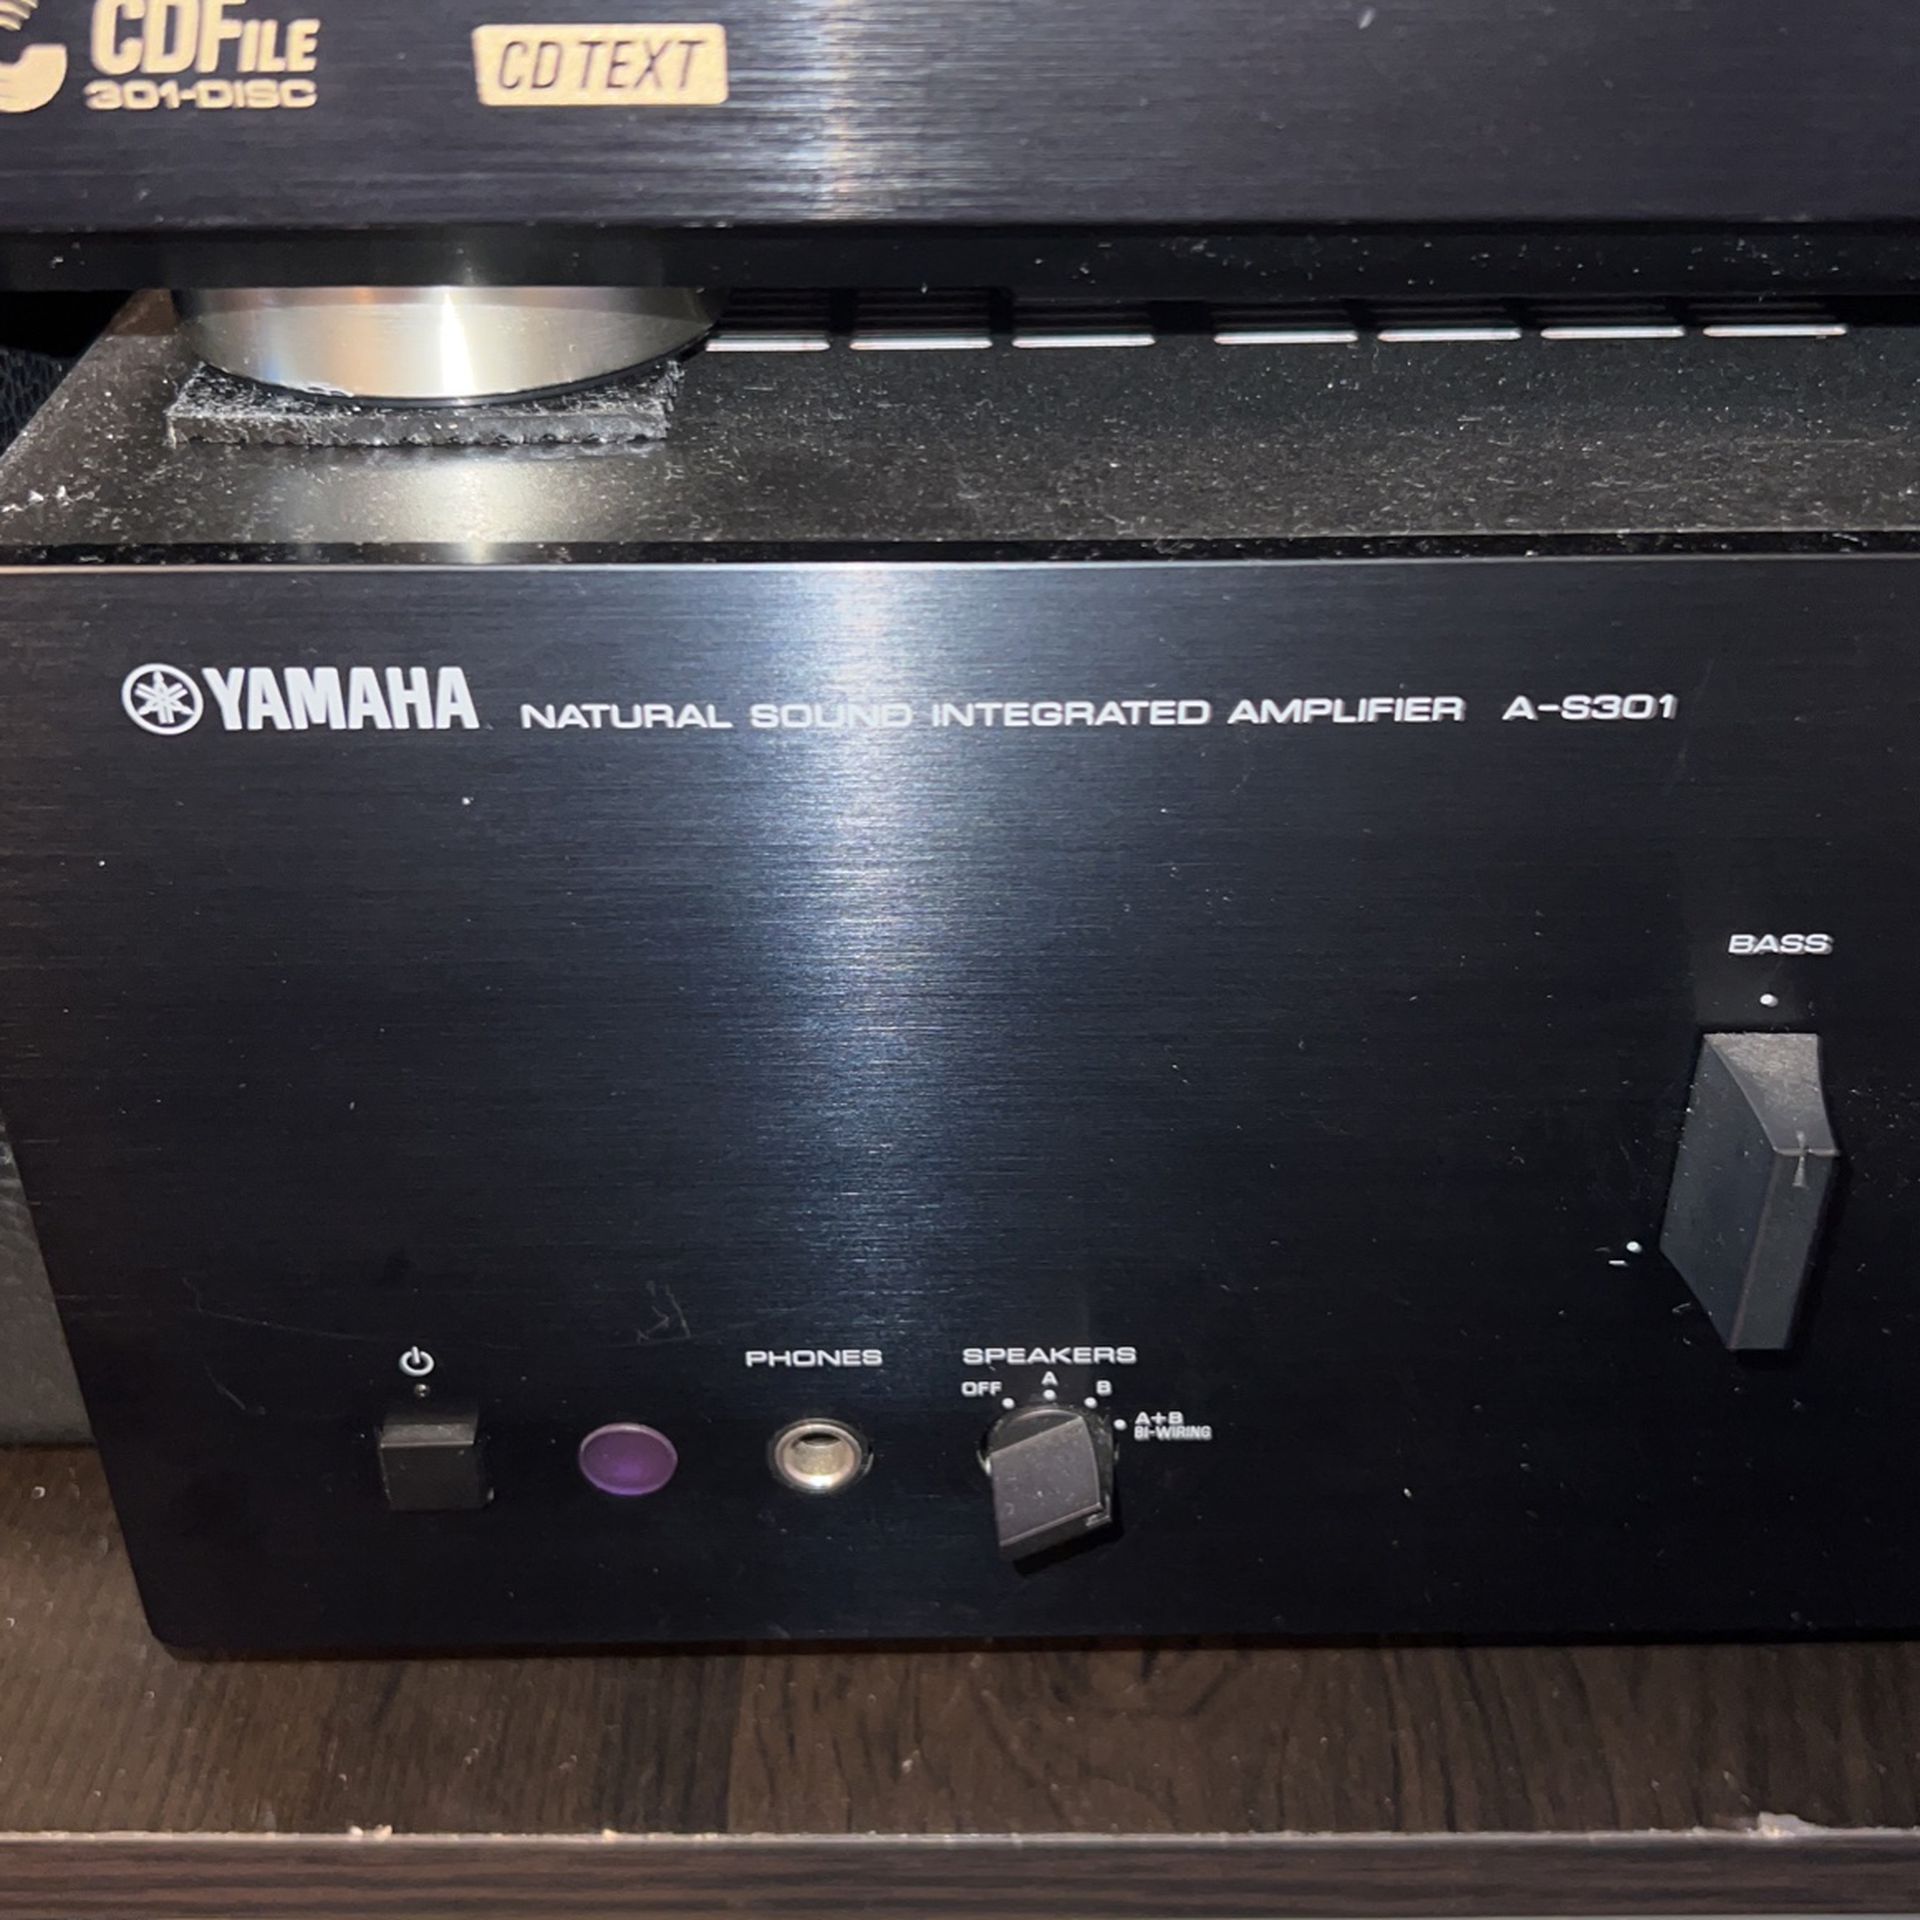 Yamaha A-s301 Amplifier for Sale in Lawndale, CA - OfferUp